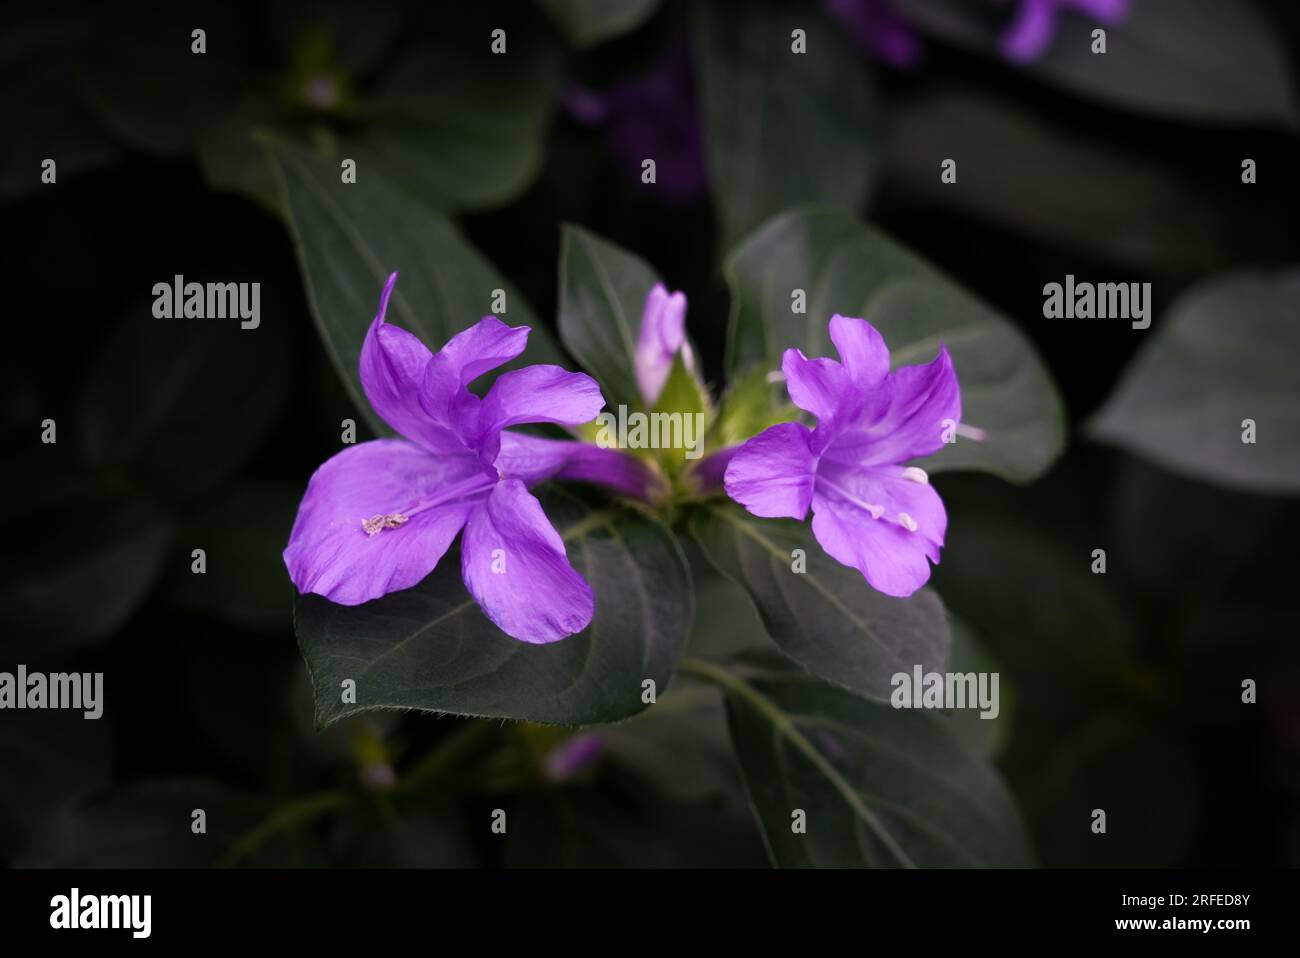 Barleria cristata with purple flowers. Close-up of the flowering plant. Philippine violet, bluebell barleria or crested Philippine violet. Stock Photo